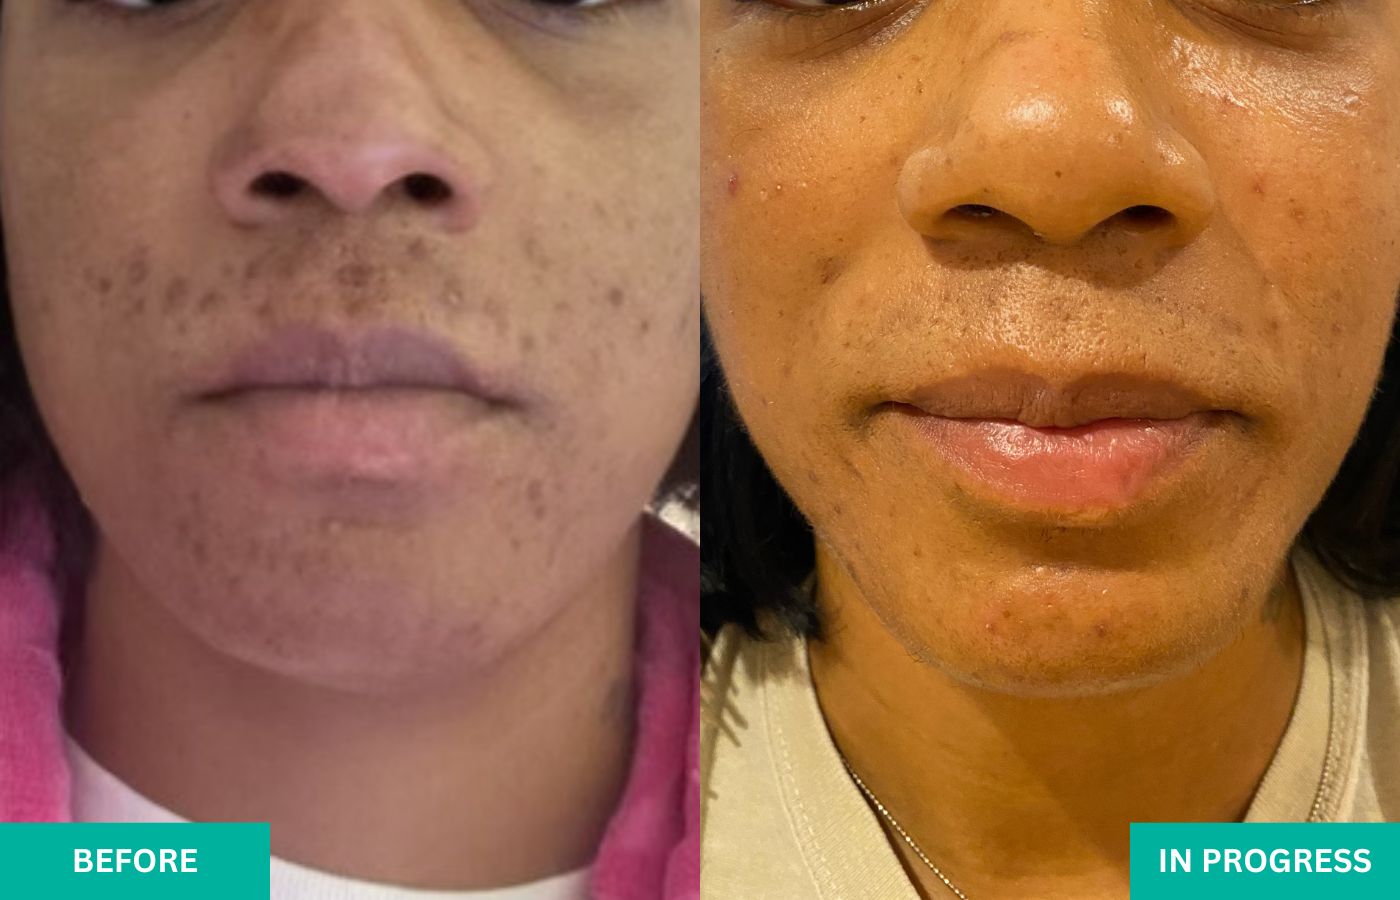 VERABELLA progress photos of hyperpigmentation and scarring from acne